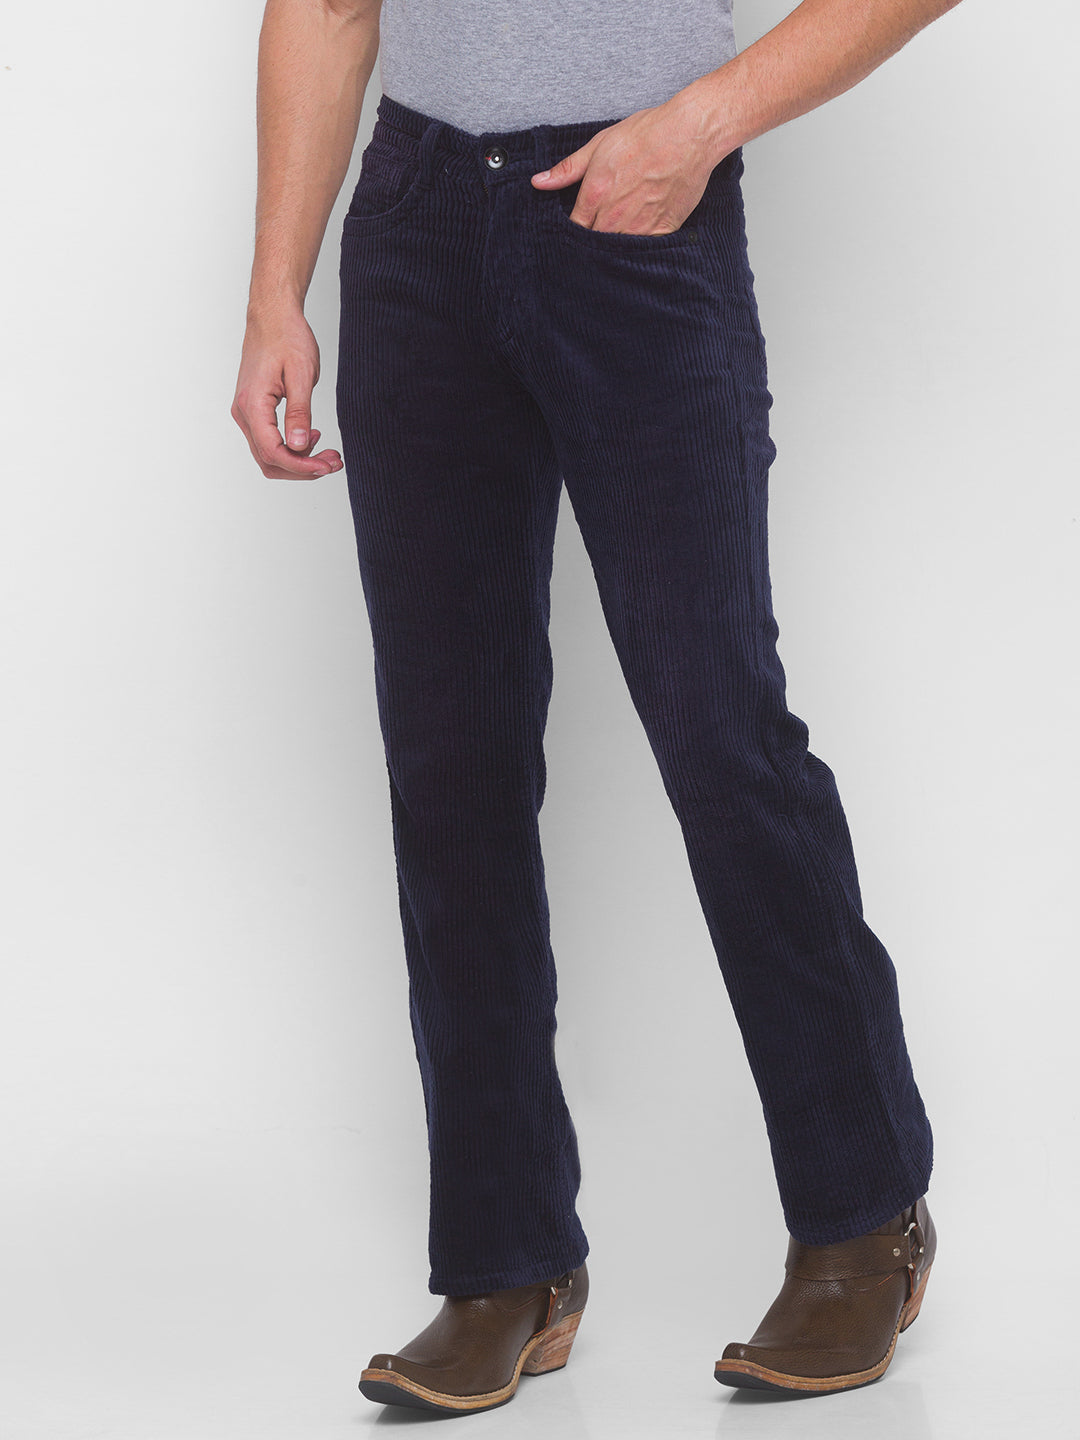 Navy Morton cotton-corduroy trousers | Oliver Spencer | MATCHES UK